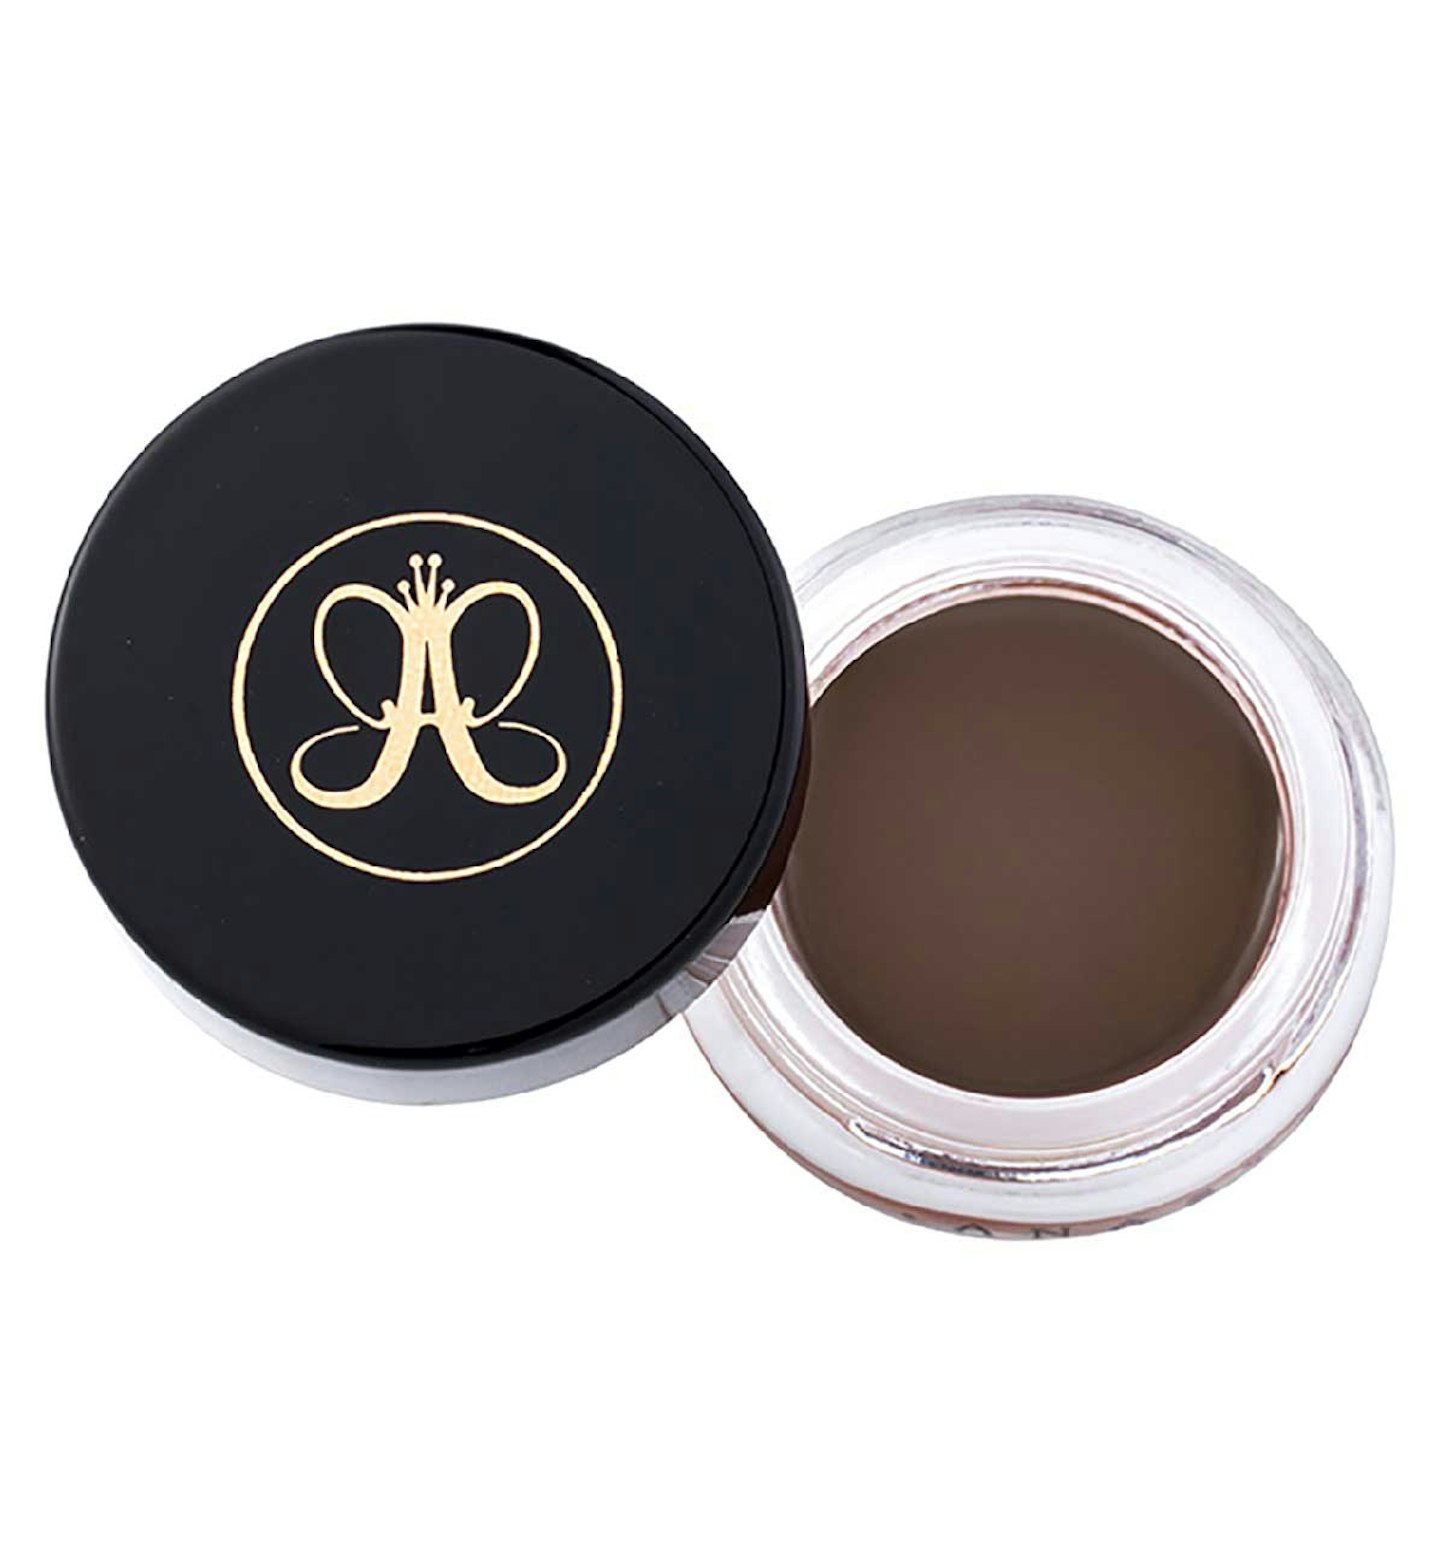 Boots New Beauty - Anastasia Beverly Hills